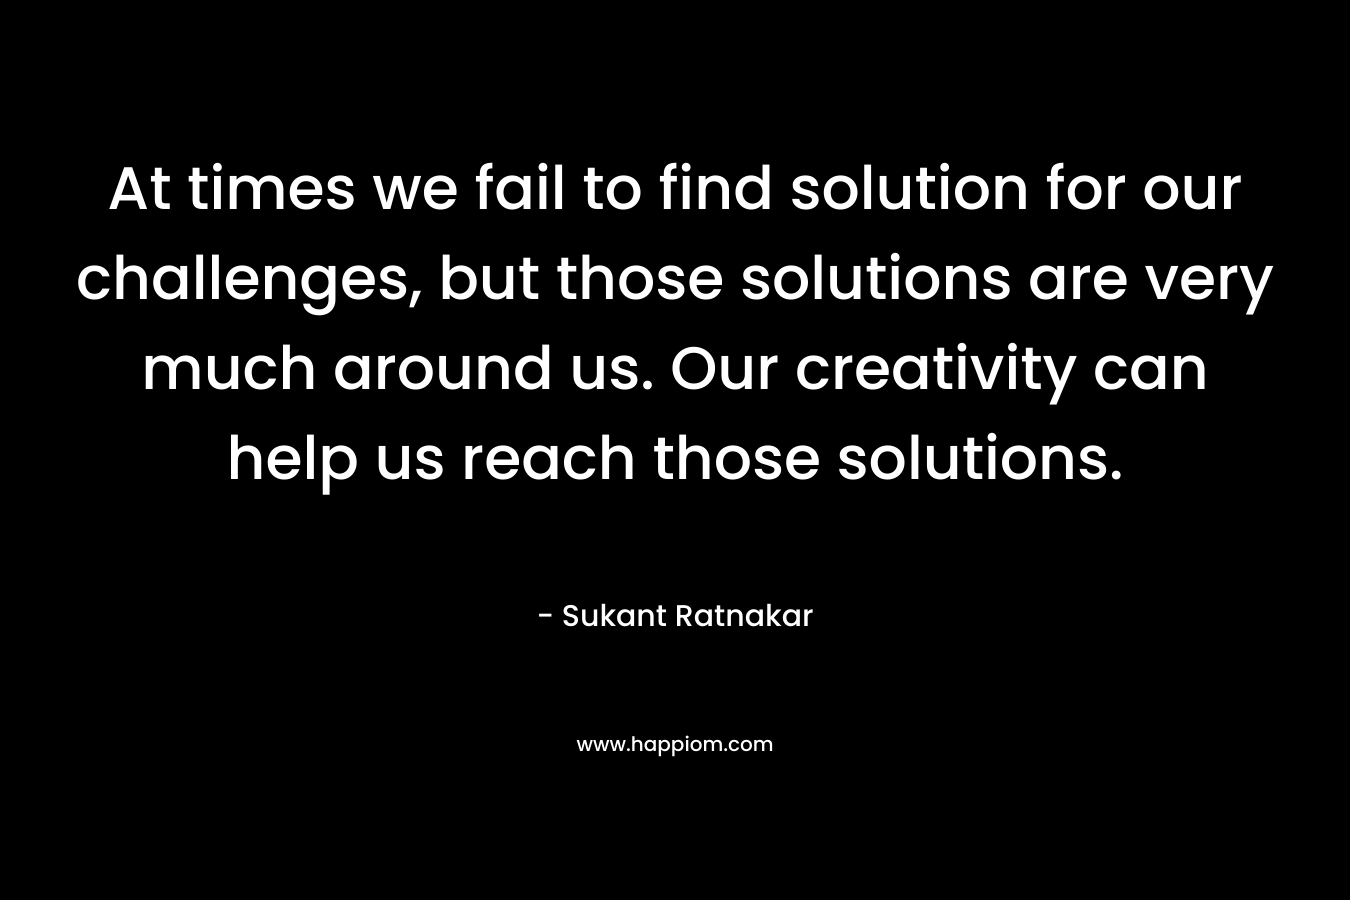 At times we fail to find solution for our challenges, but those solutions are very much around us. Our creativity can help us reach those solutions.